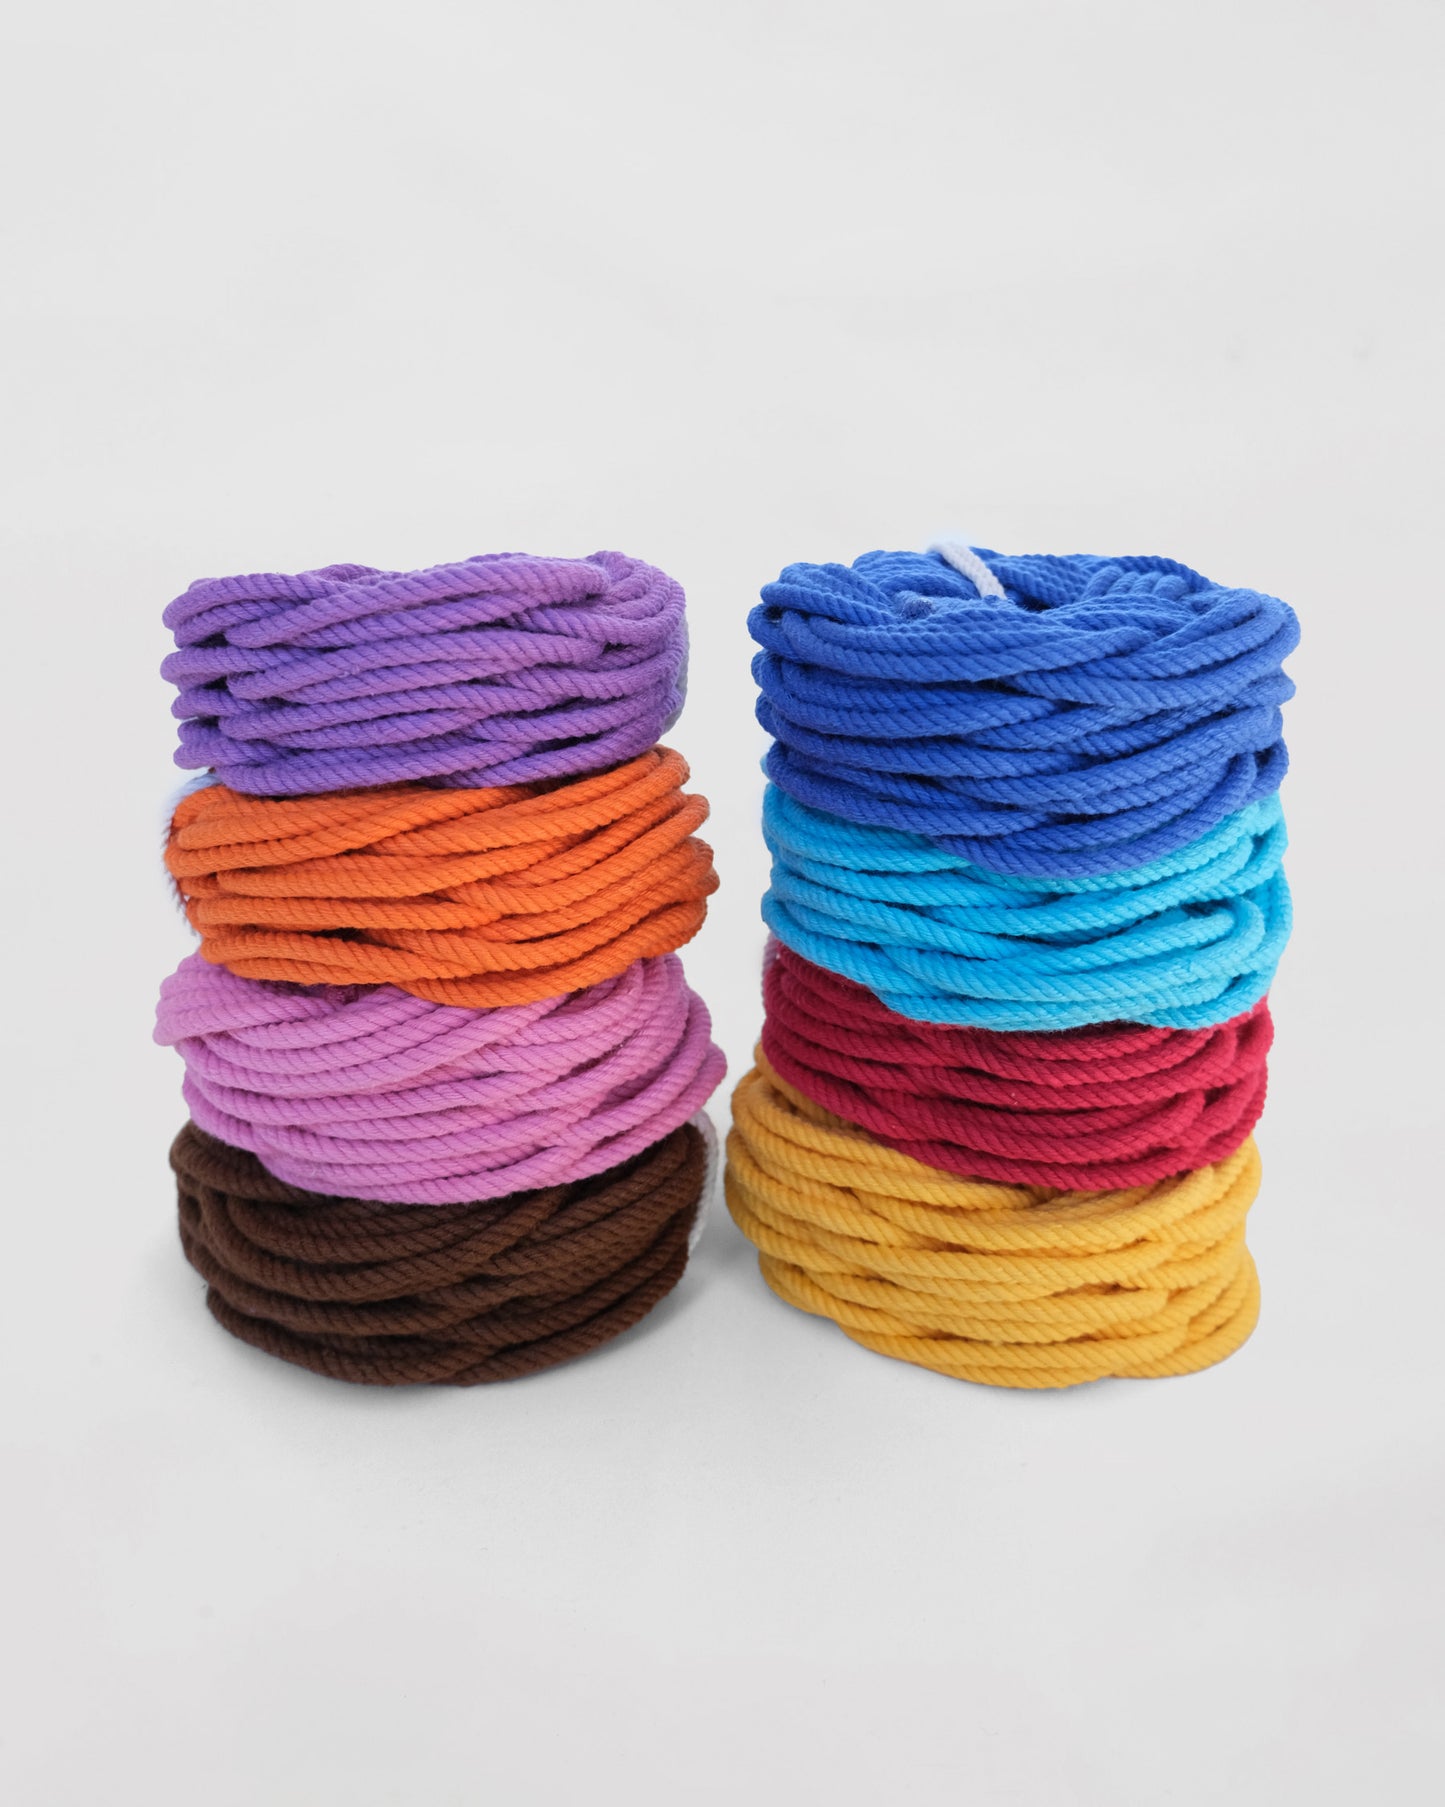 Hand-Woven Knot Coaster Set of 4